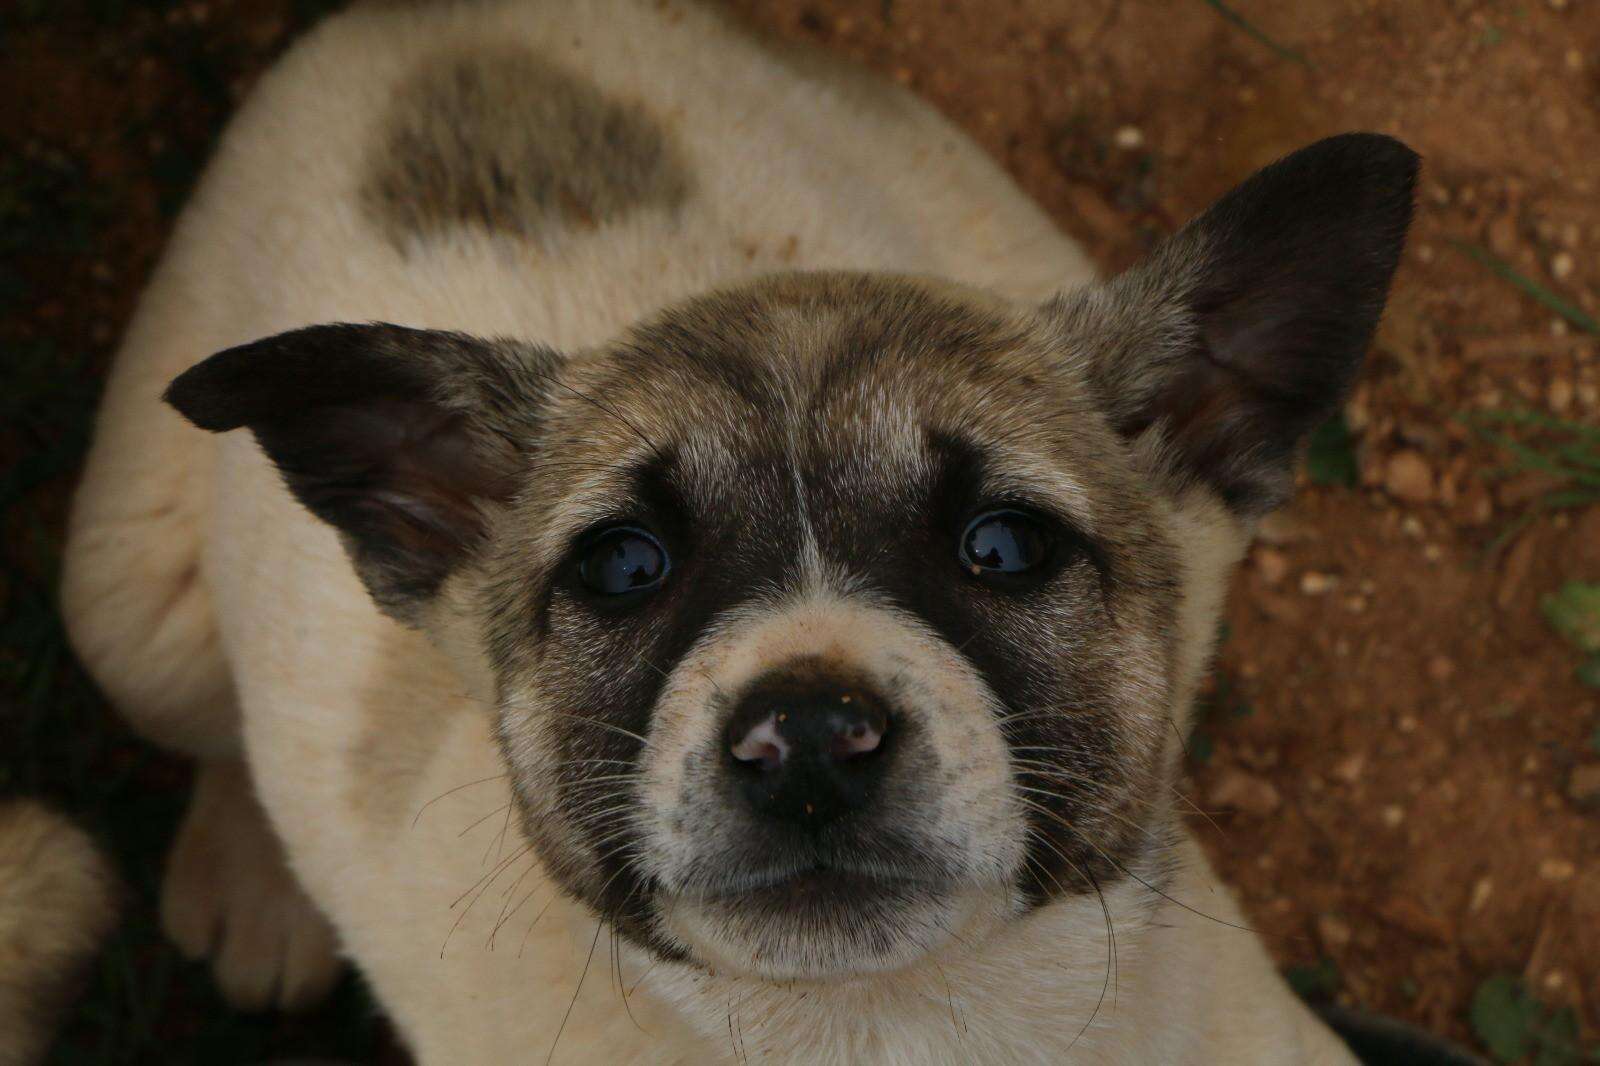 One of the puppies the 'cat man' of Aleppo is saving